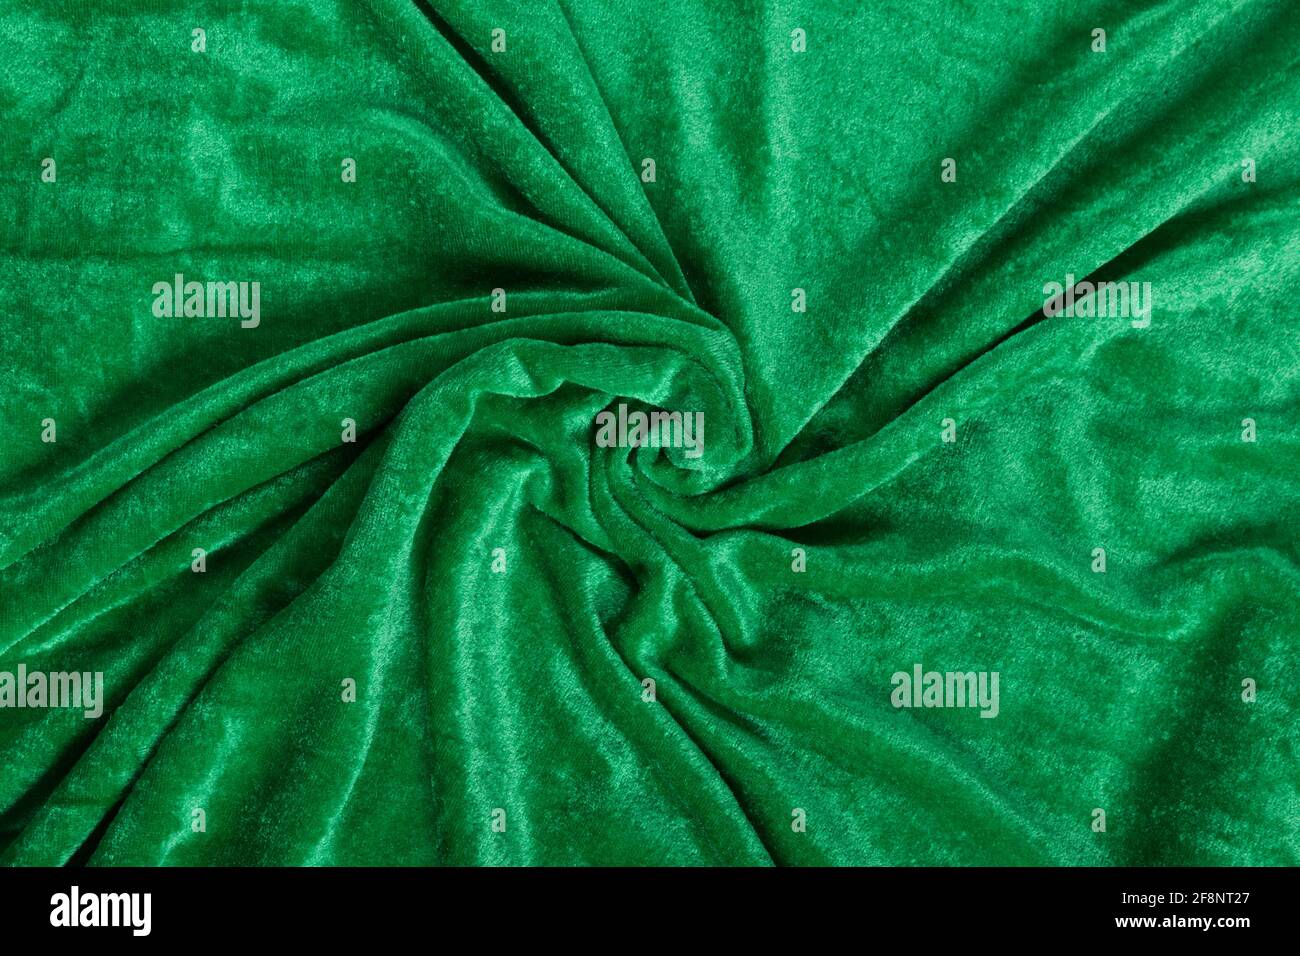 Colored green textile satin fabric folded in folds and waves with highlights and texture shimmers in the light Stock Photo